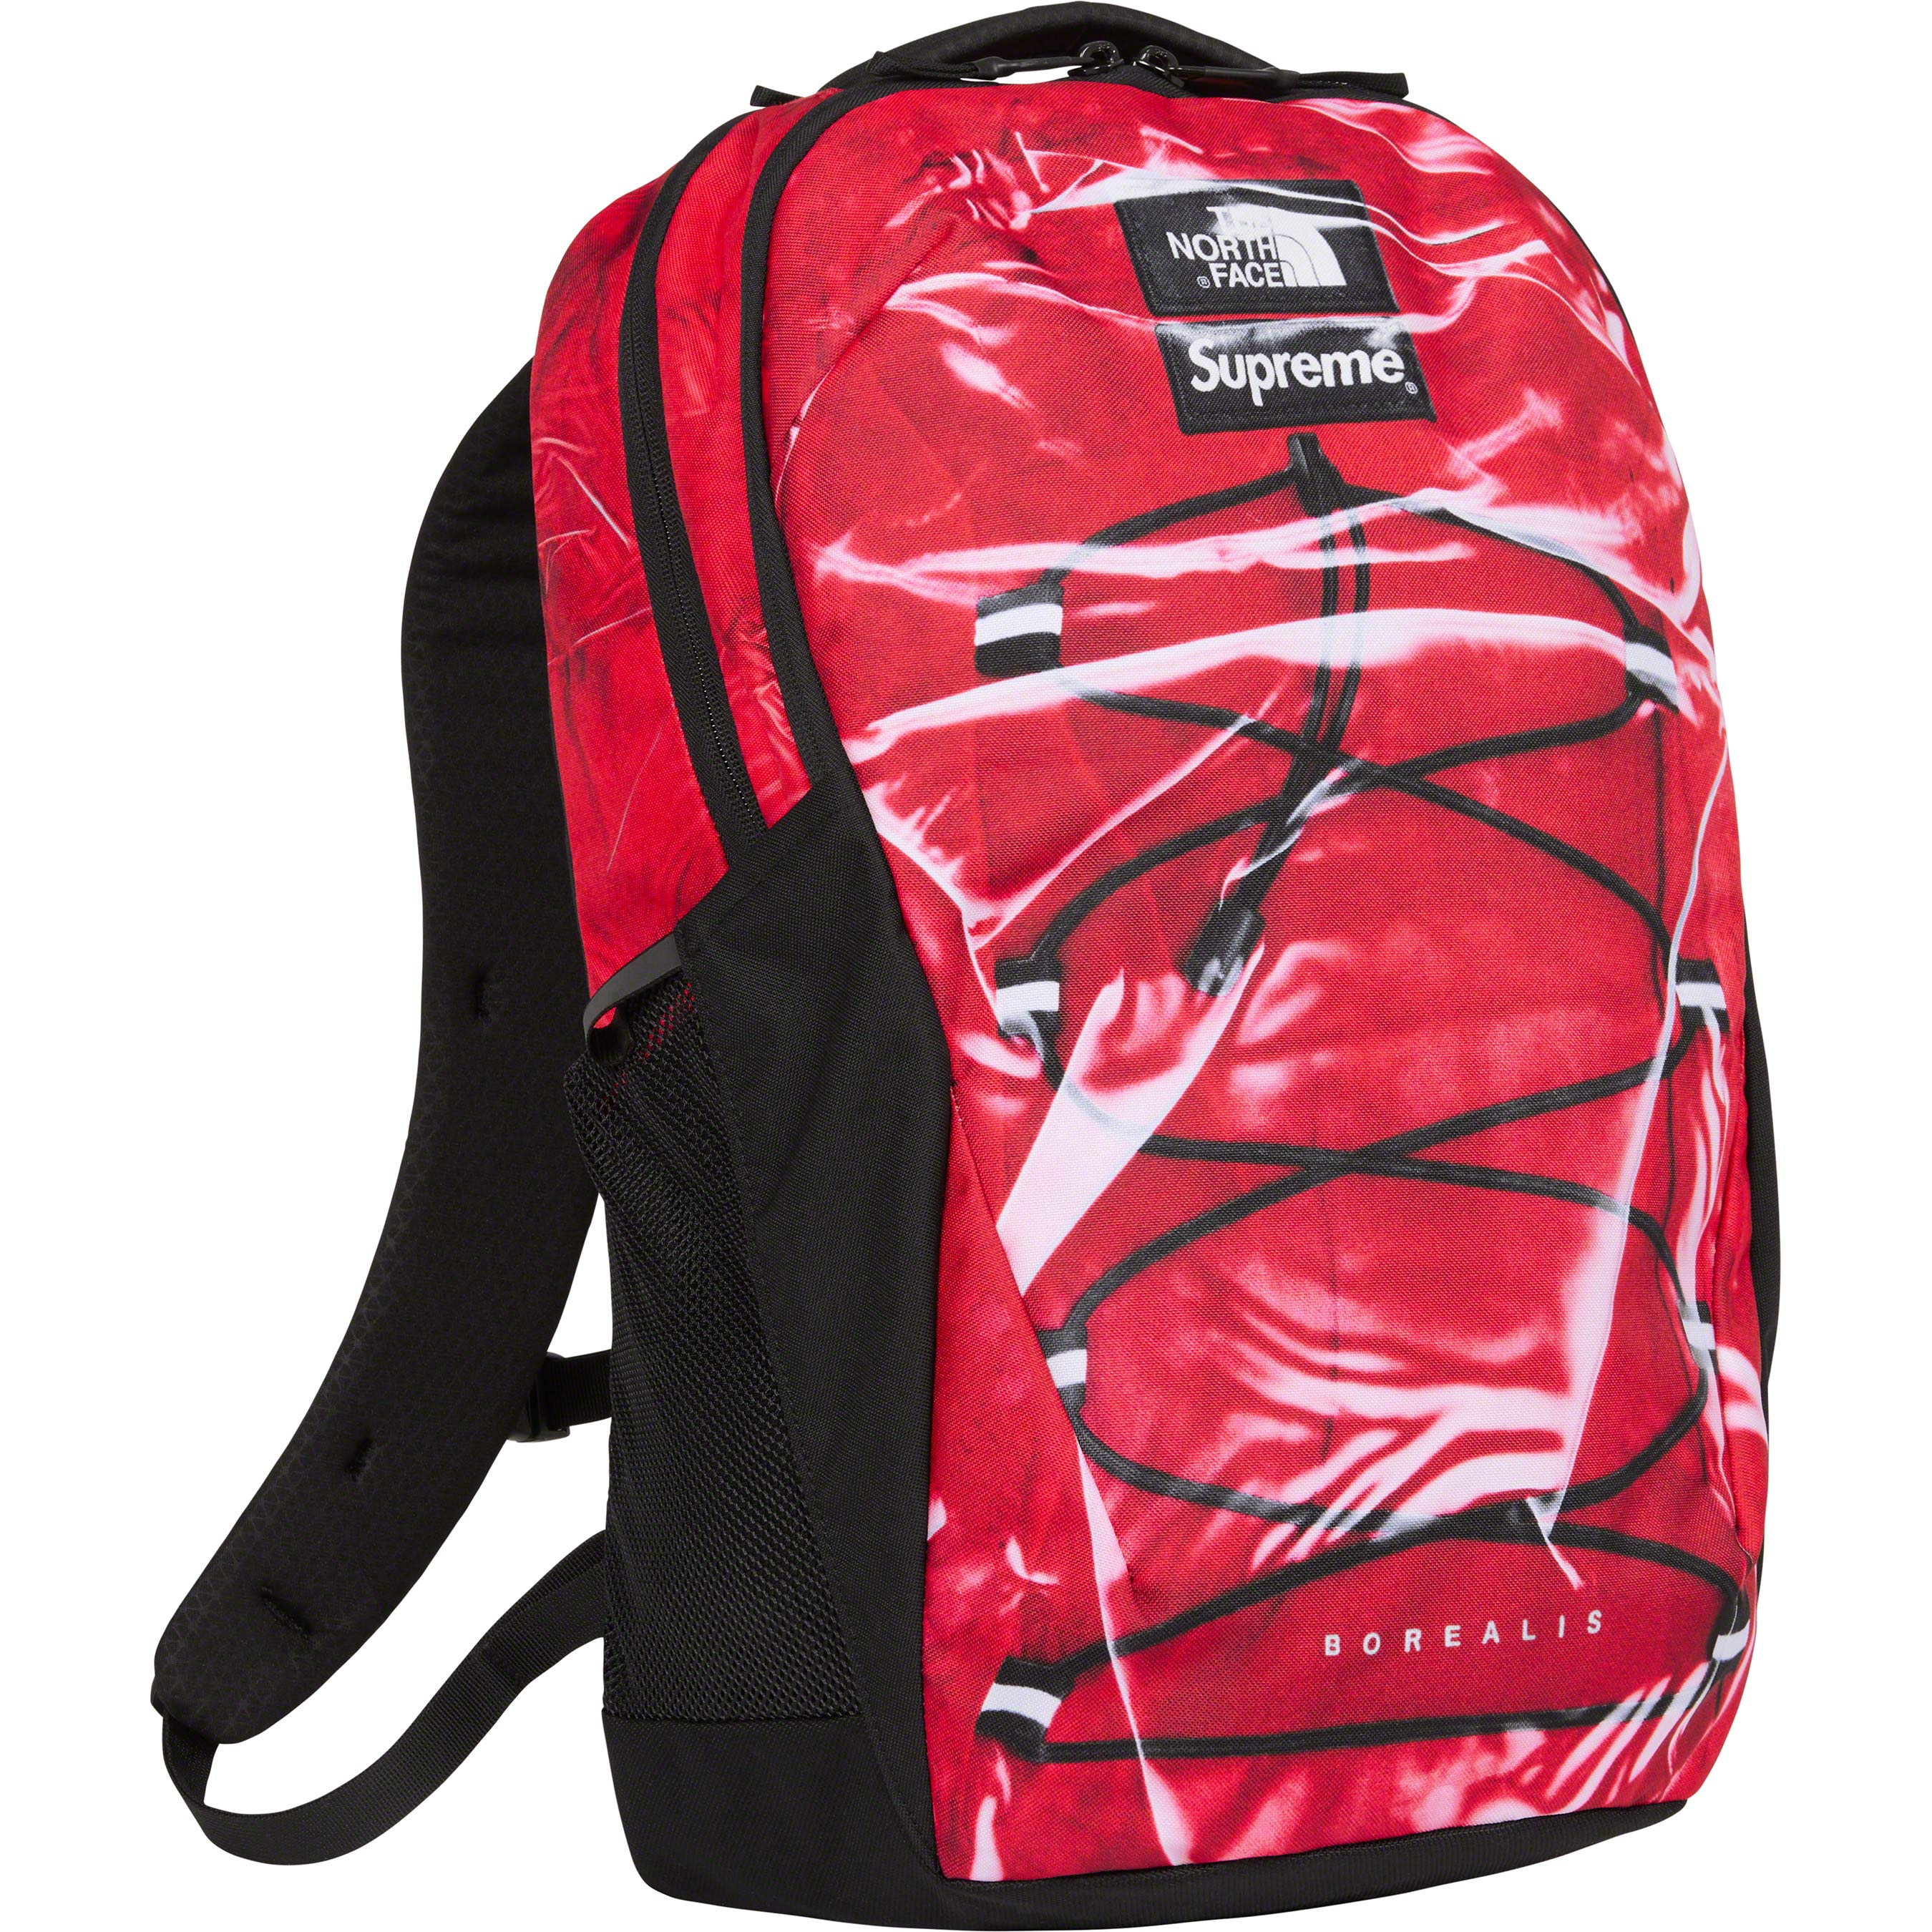 The North Face Trompe L'oeil Printed Borealis Backpack - spring 